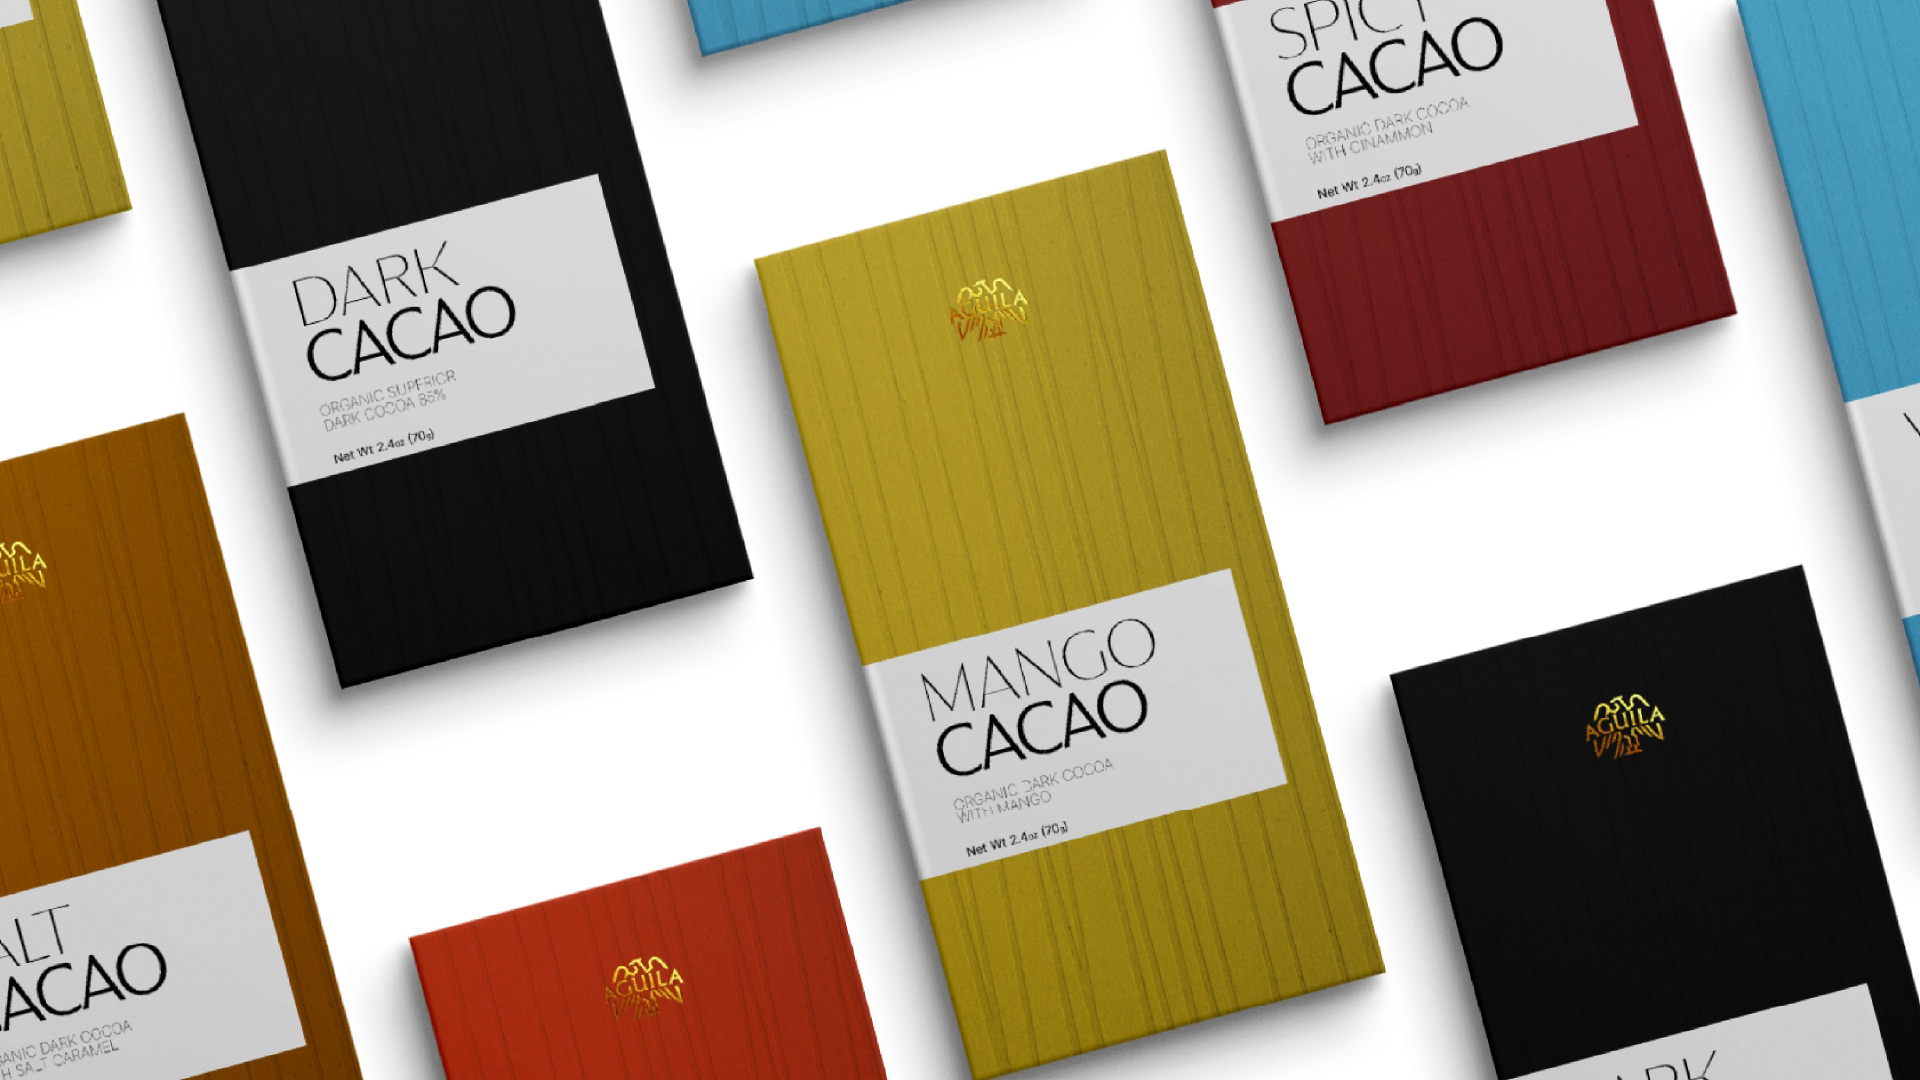 Brand Identity and Packaging Design Concept for Cacao by Chocolate Aguila